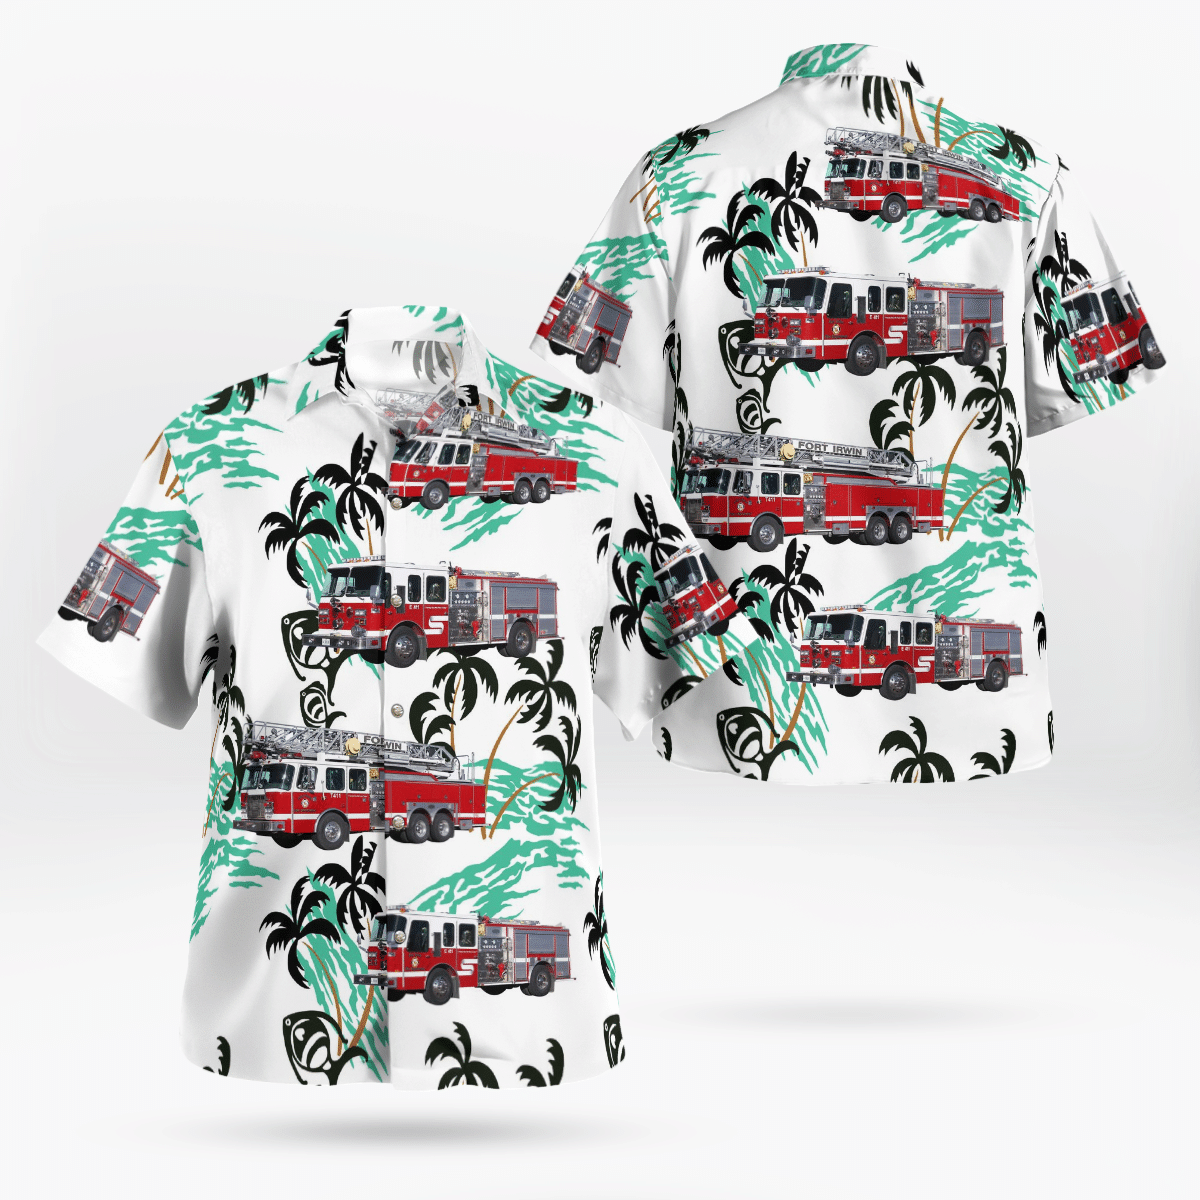 If you are in need of a new summertime look, pick up this Hawaiian shirt 112